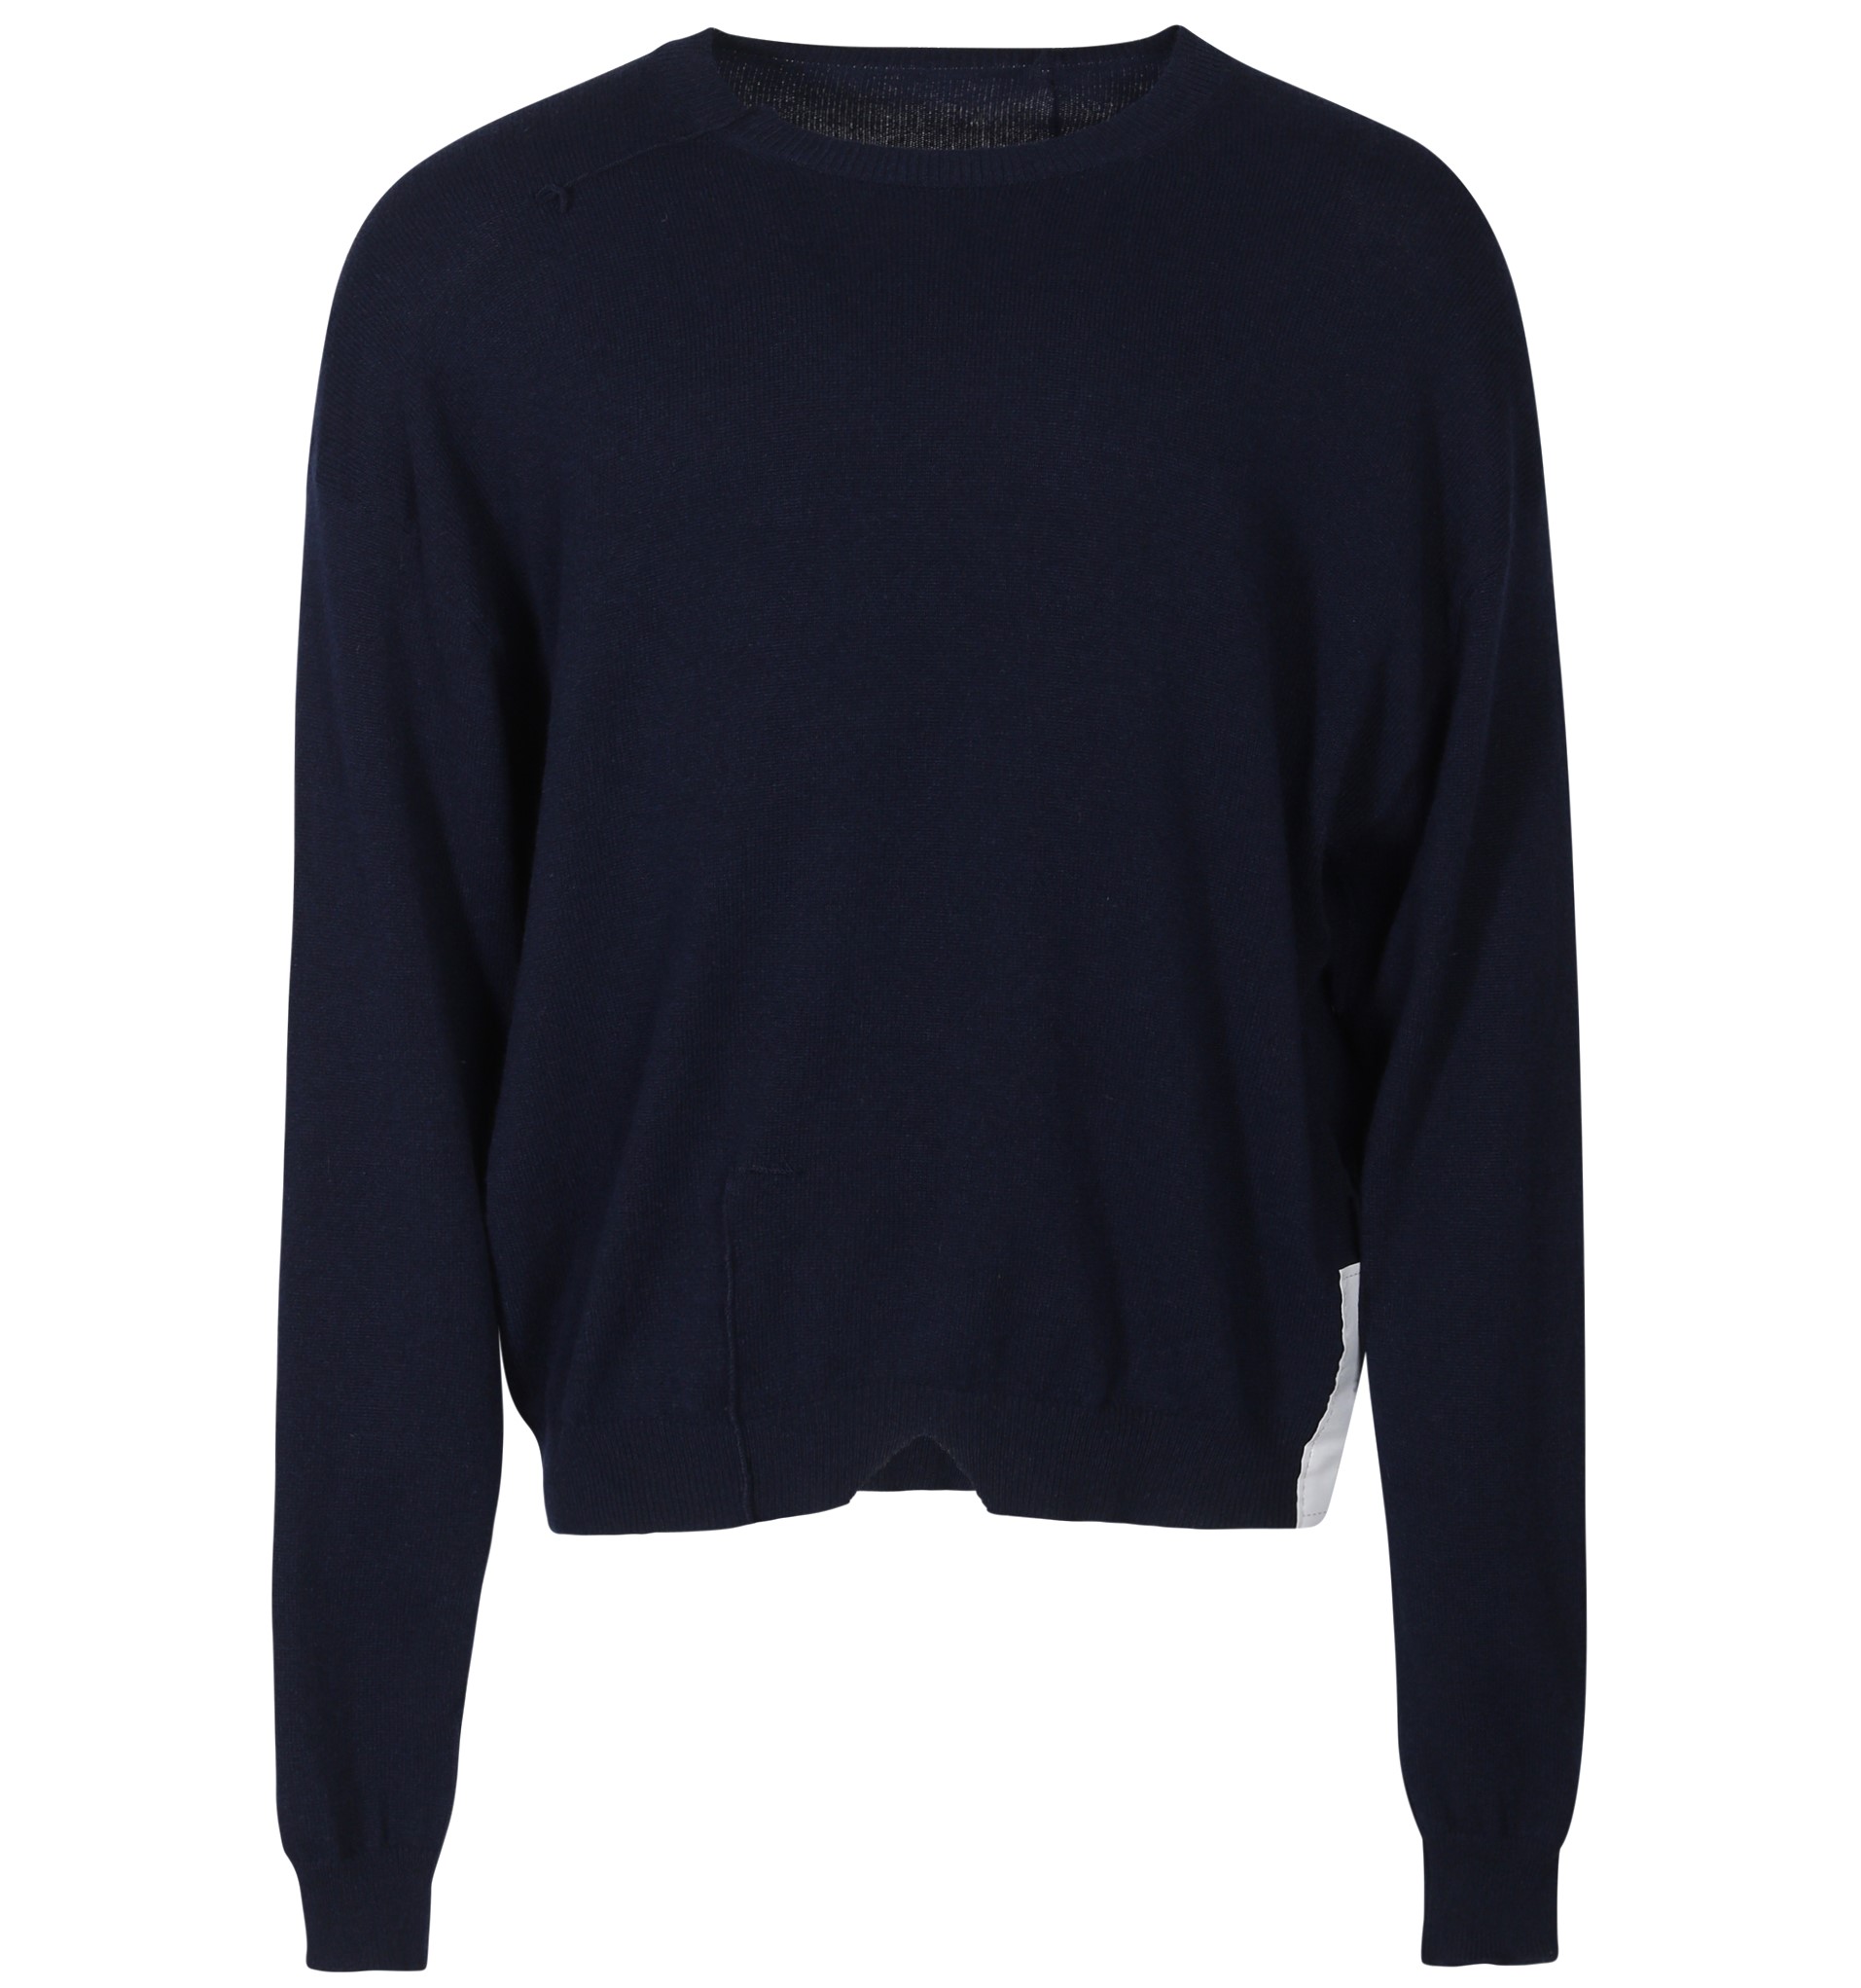 RAMAEL Infinity Cashmere Sweater in Navy XS